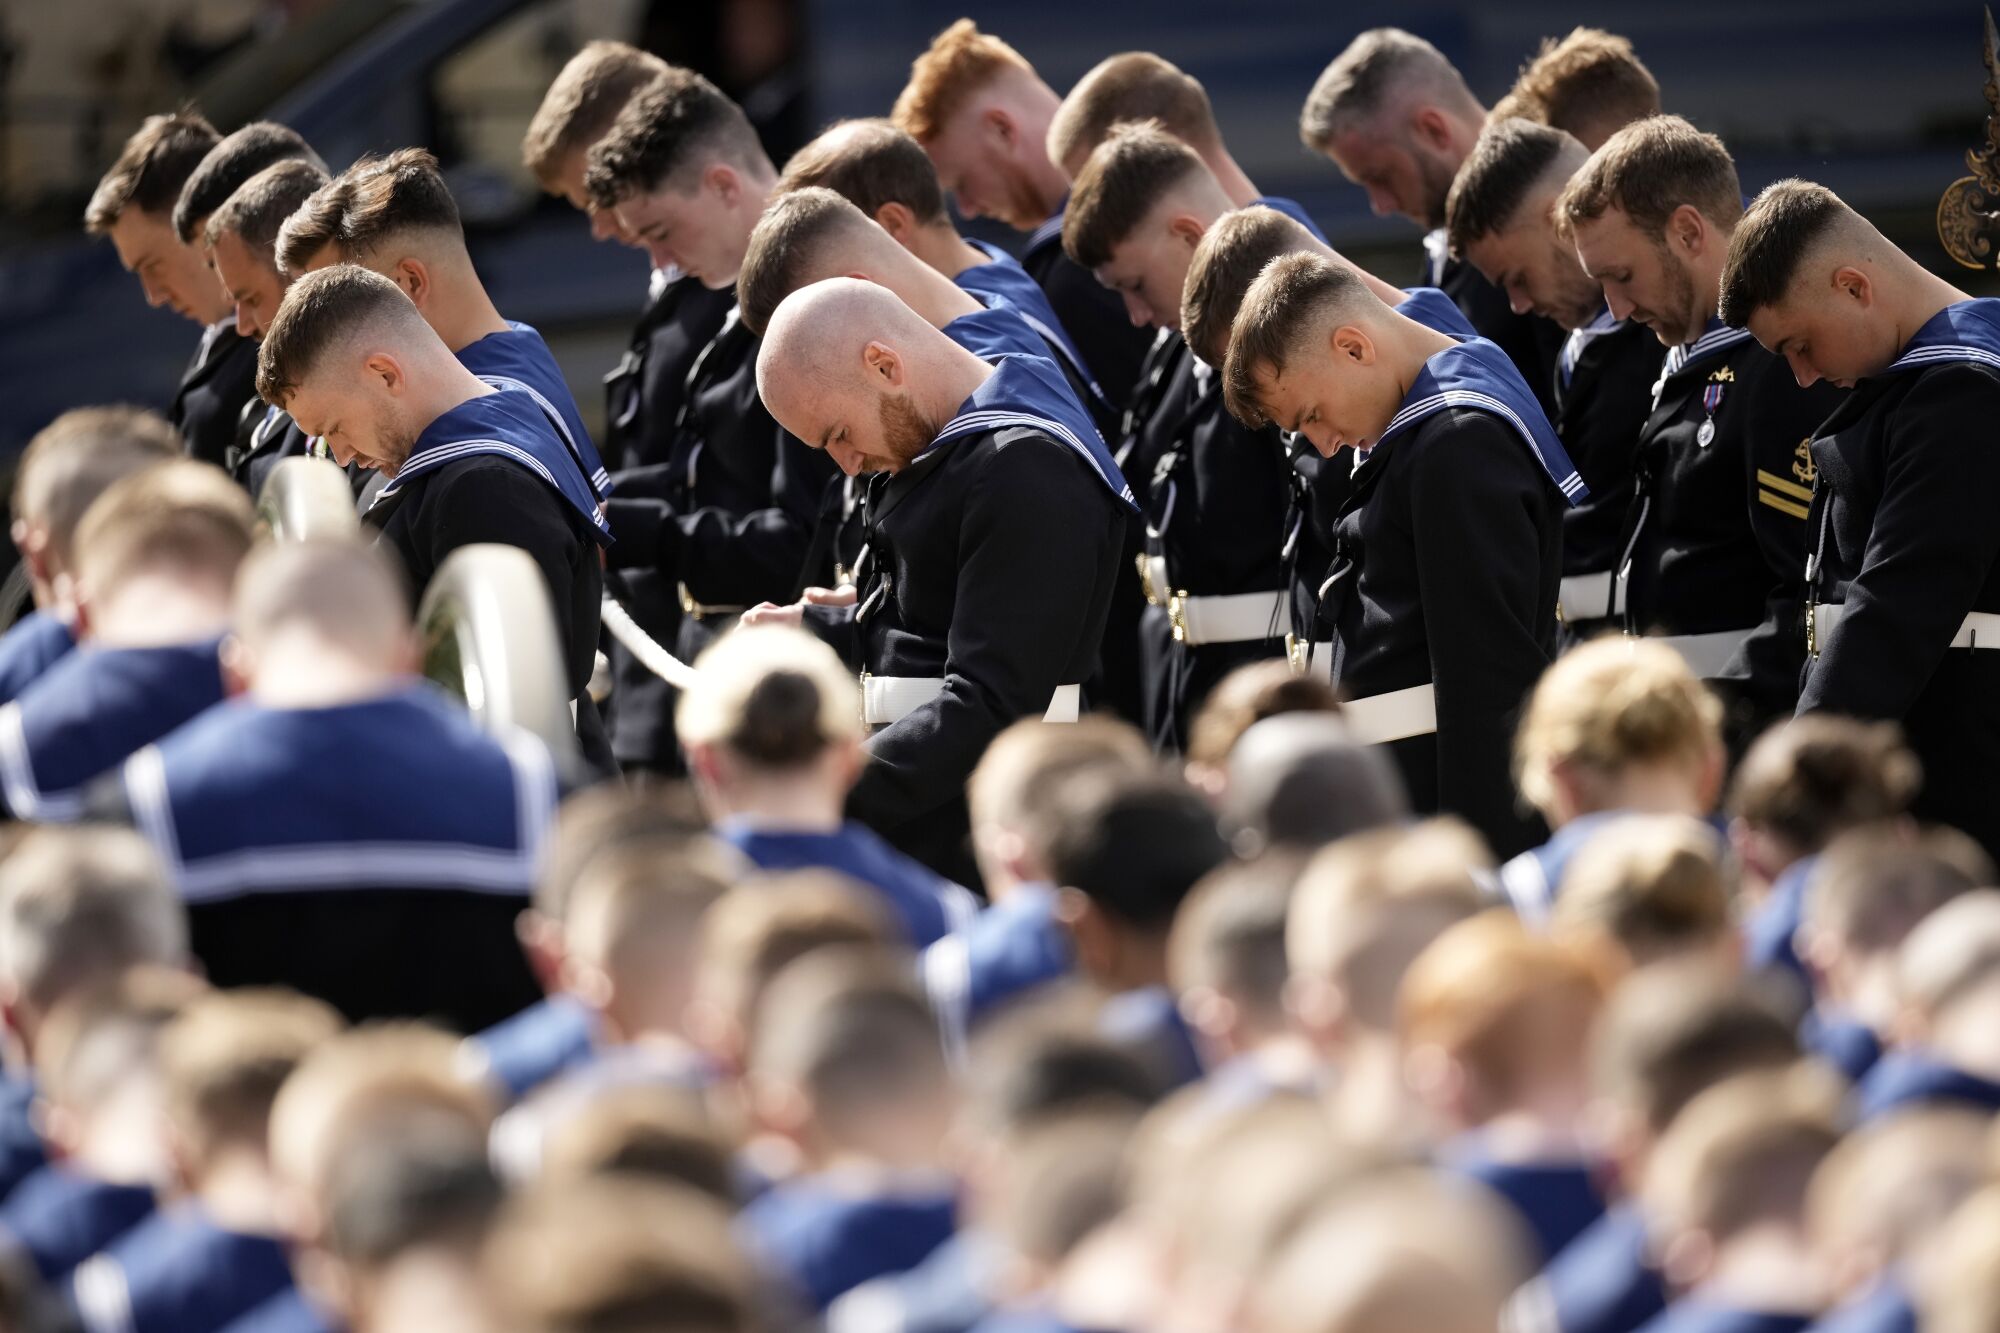 Members of the Royal Navy pay their respects by bowing their heads during the state funeral of Queen Elizabeth II.